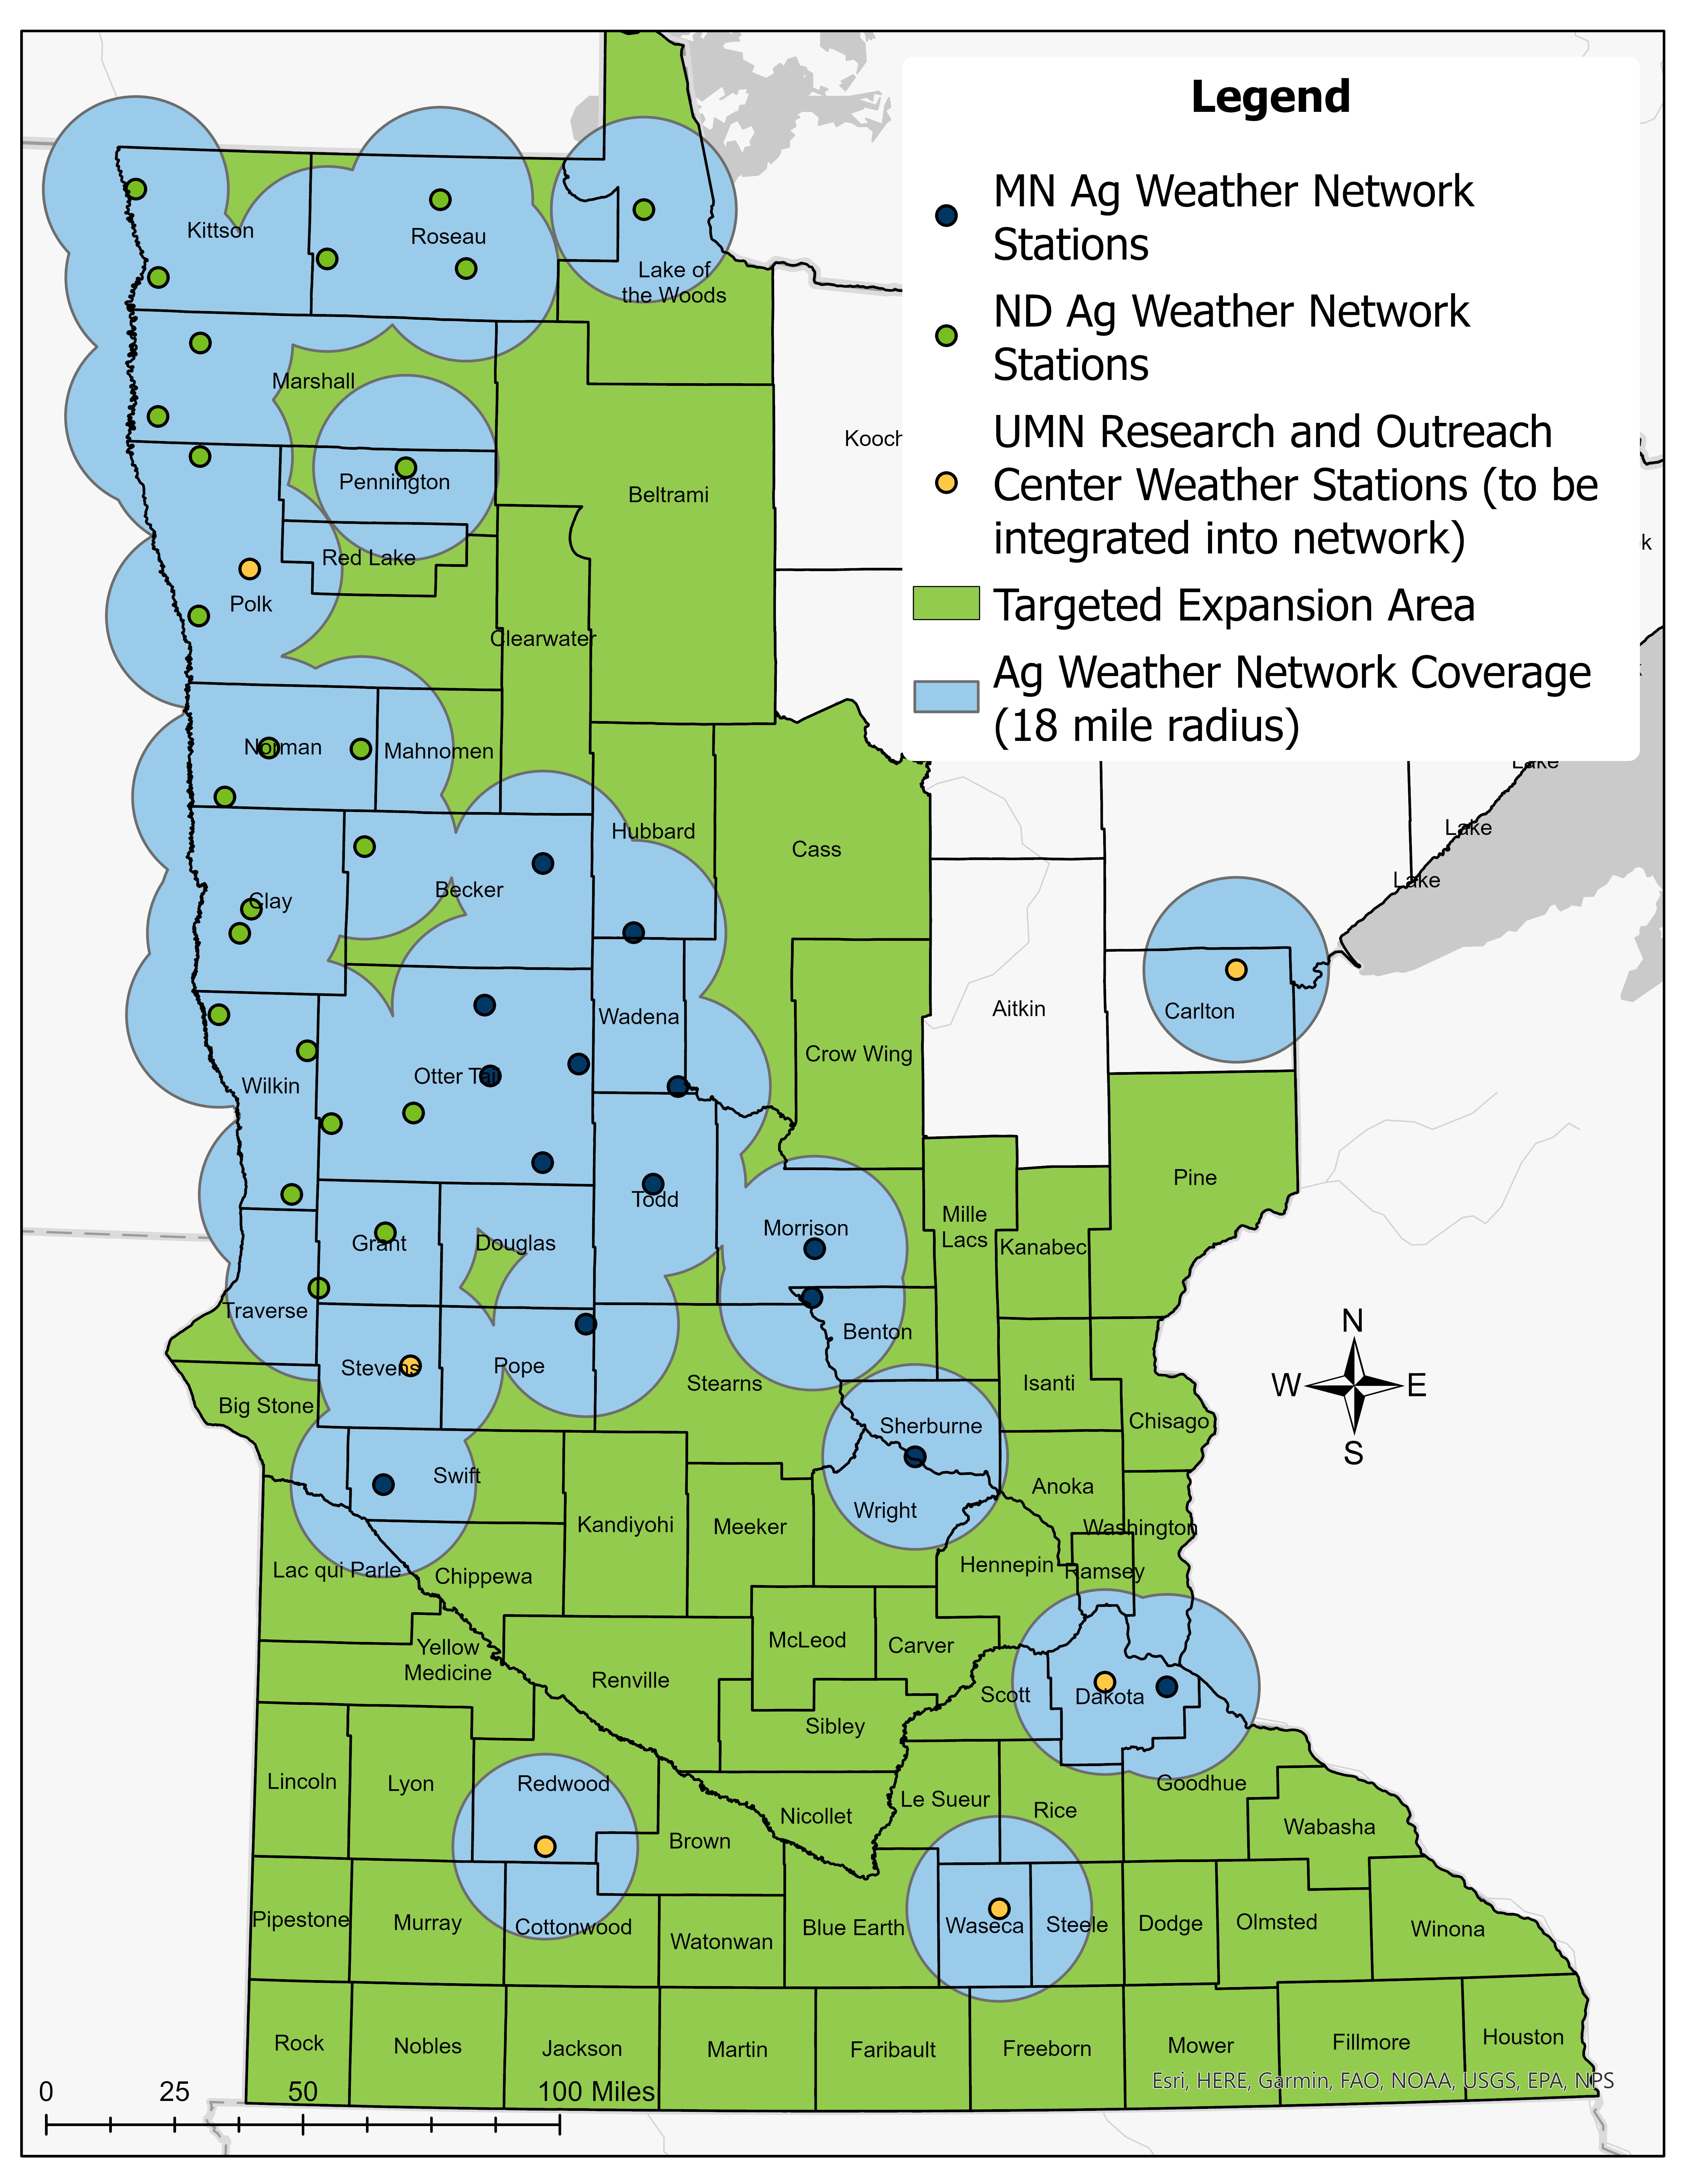 Map of the existing weather stations in Minnesota as part of the Minnesota Ag Weather Network (14), the North Dakota Ag Weather Network (24) and the University of Minnesota Research and Outreach Centers (6). The locations for the planned expansion sites are also included and listed as phase 1 (40) and phase 2 (40).